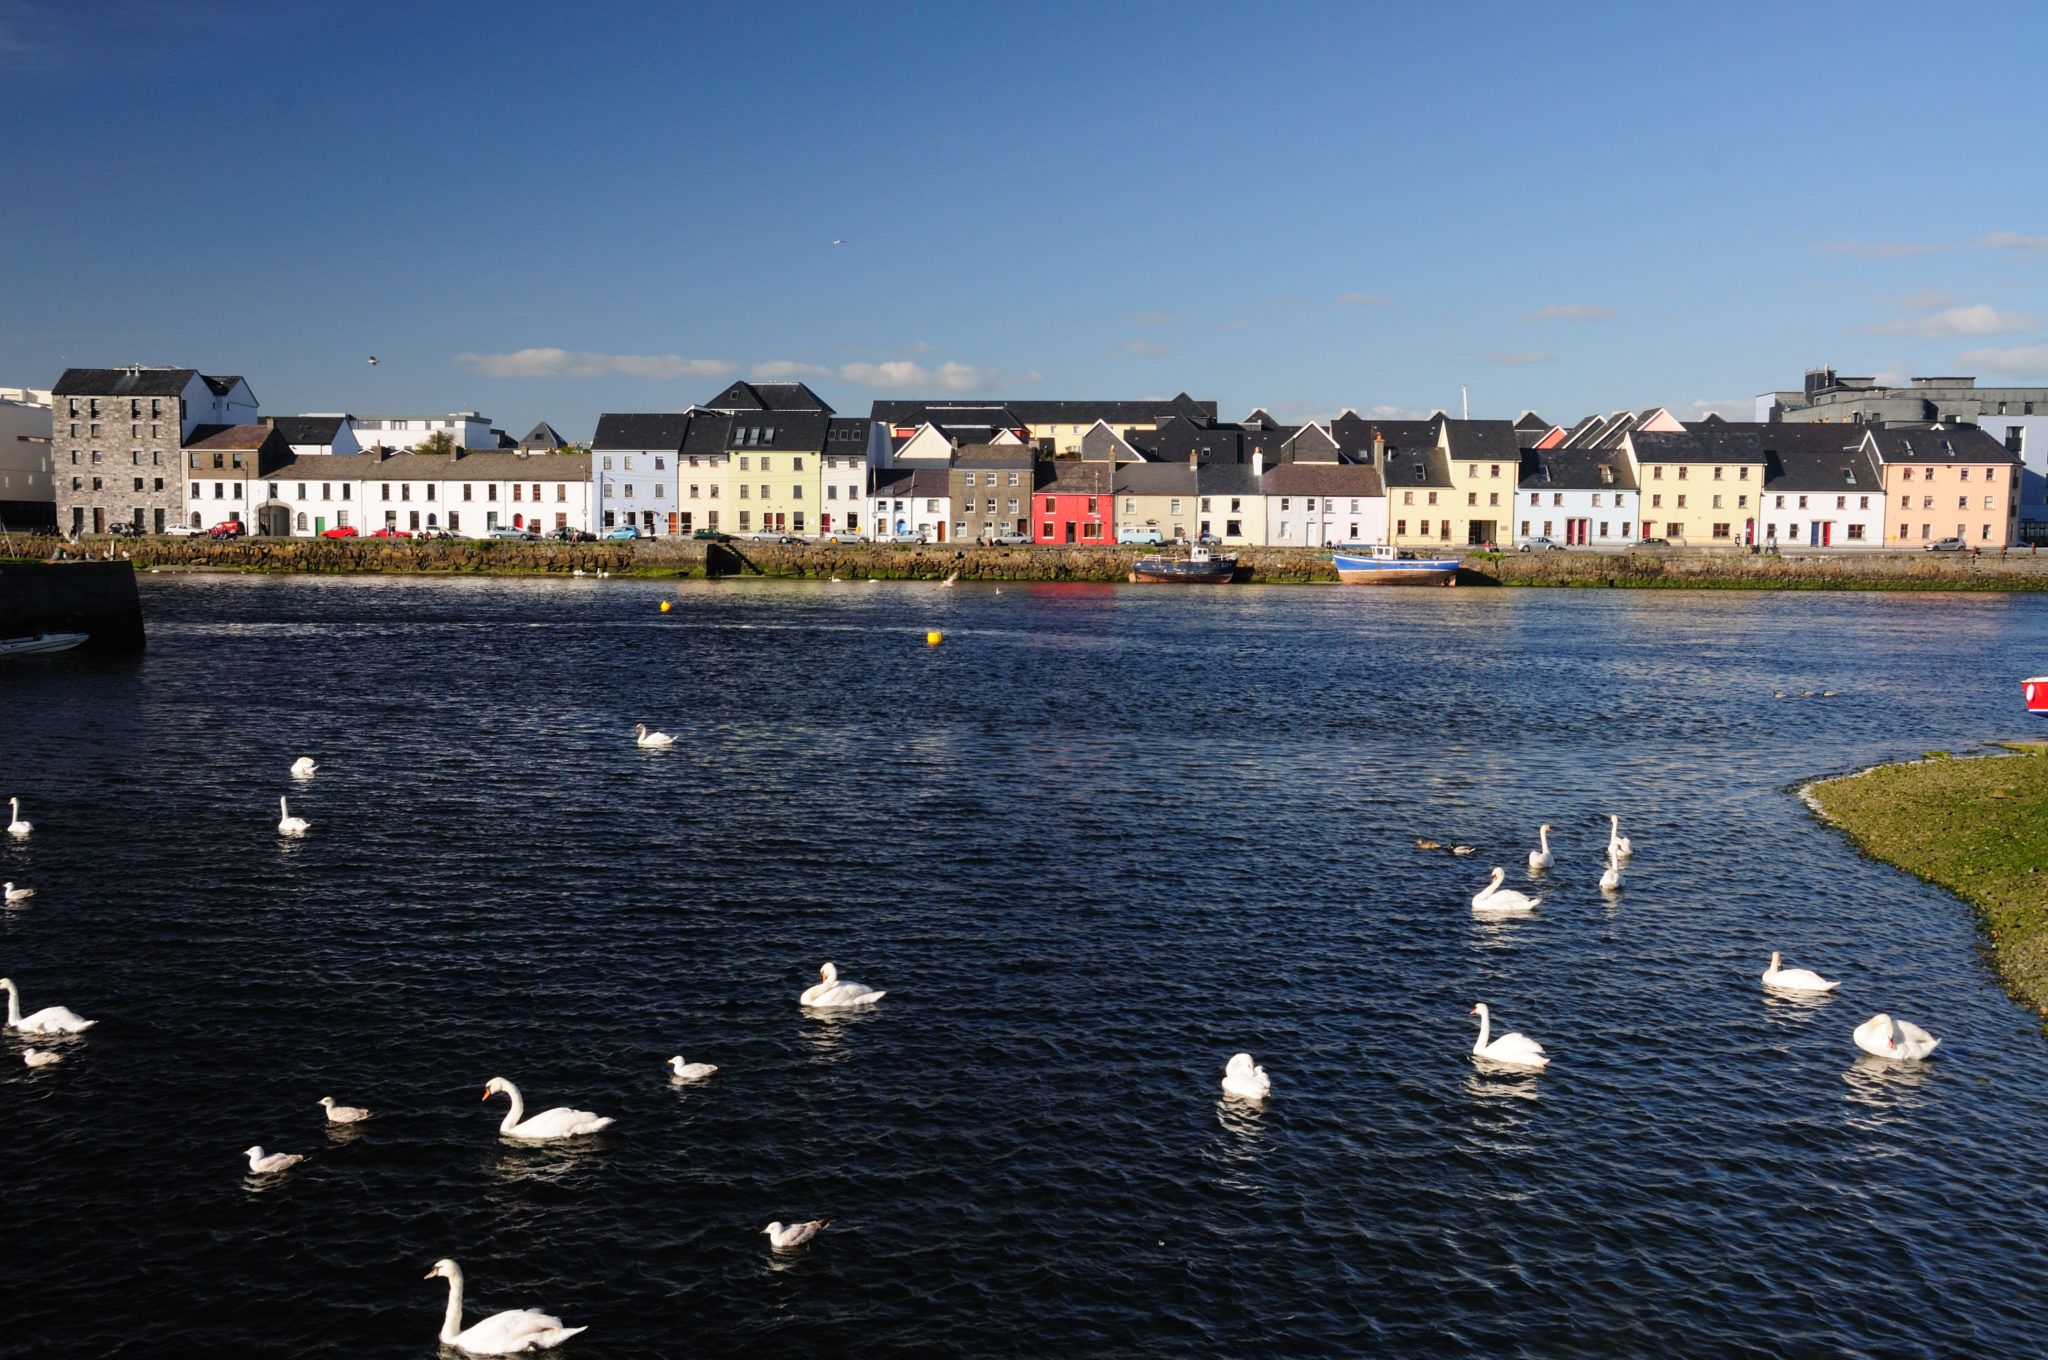 Galway 2020